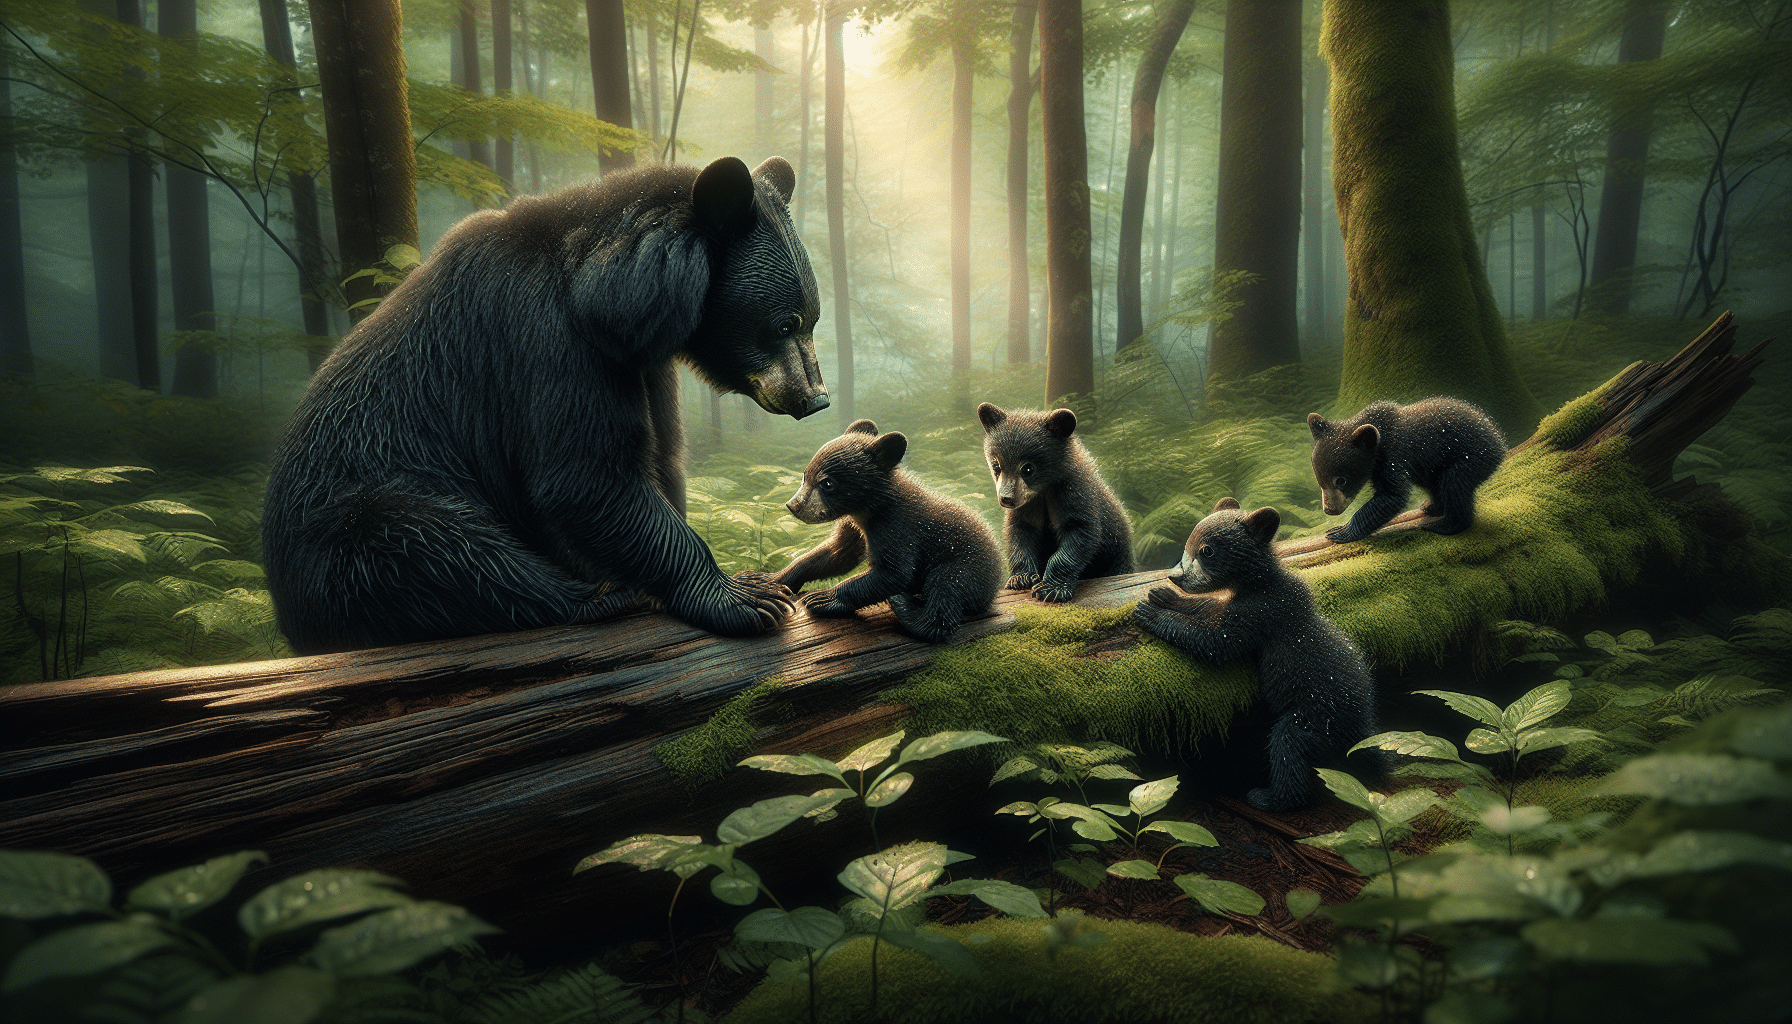 A scene in a dense forest with a mother black bear tenderly observing her three cubs, placing one in a playful moment between her forepaws. The cubs, with their shiny black fur and innocent eyes, are variously exploring around, one playfully leaping over a fallen tree trunk, and another curiously sniffing at leaves. The lush greenery of the forest and the soft light filtering through the leaves above envelops them in an aura of serenity and protection. There are no human elements, text or logos included in the scene.